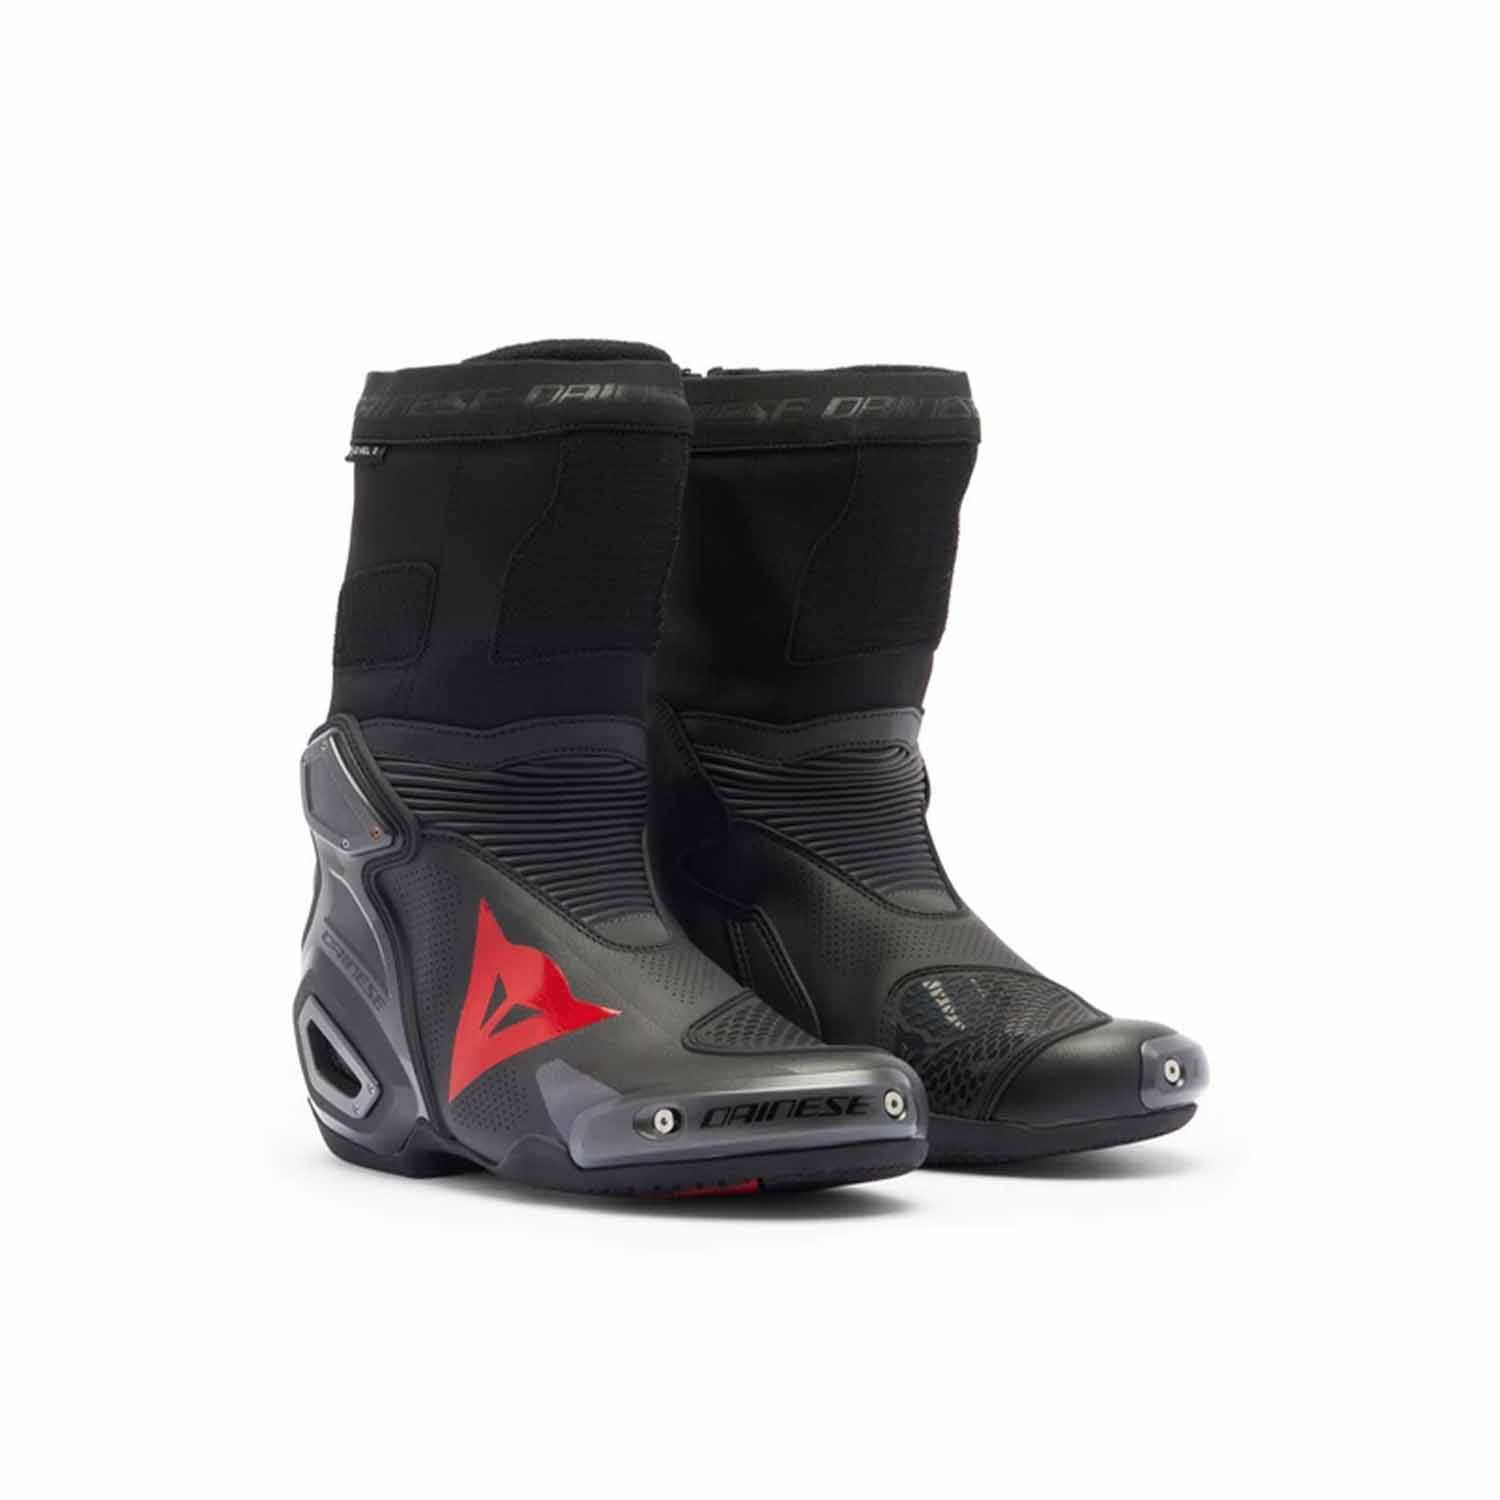 Image of EU Dainese Axial 2 Air Boots Black Black Red Fluo Taille 40